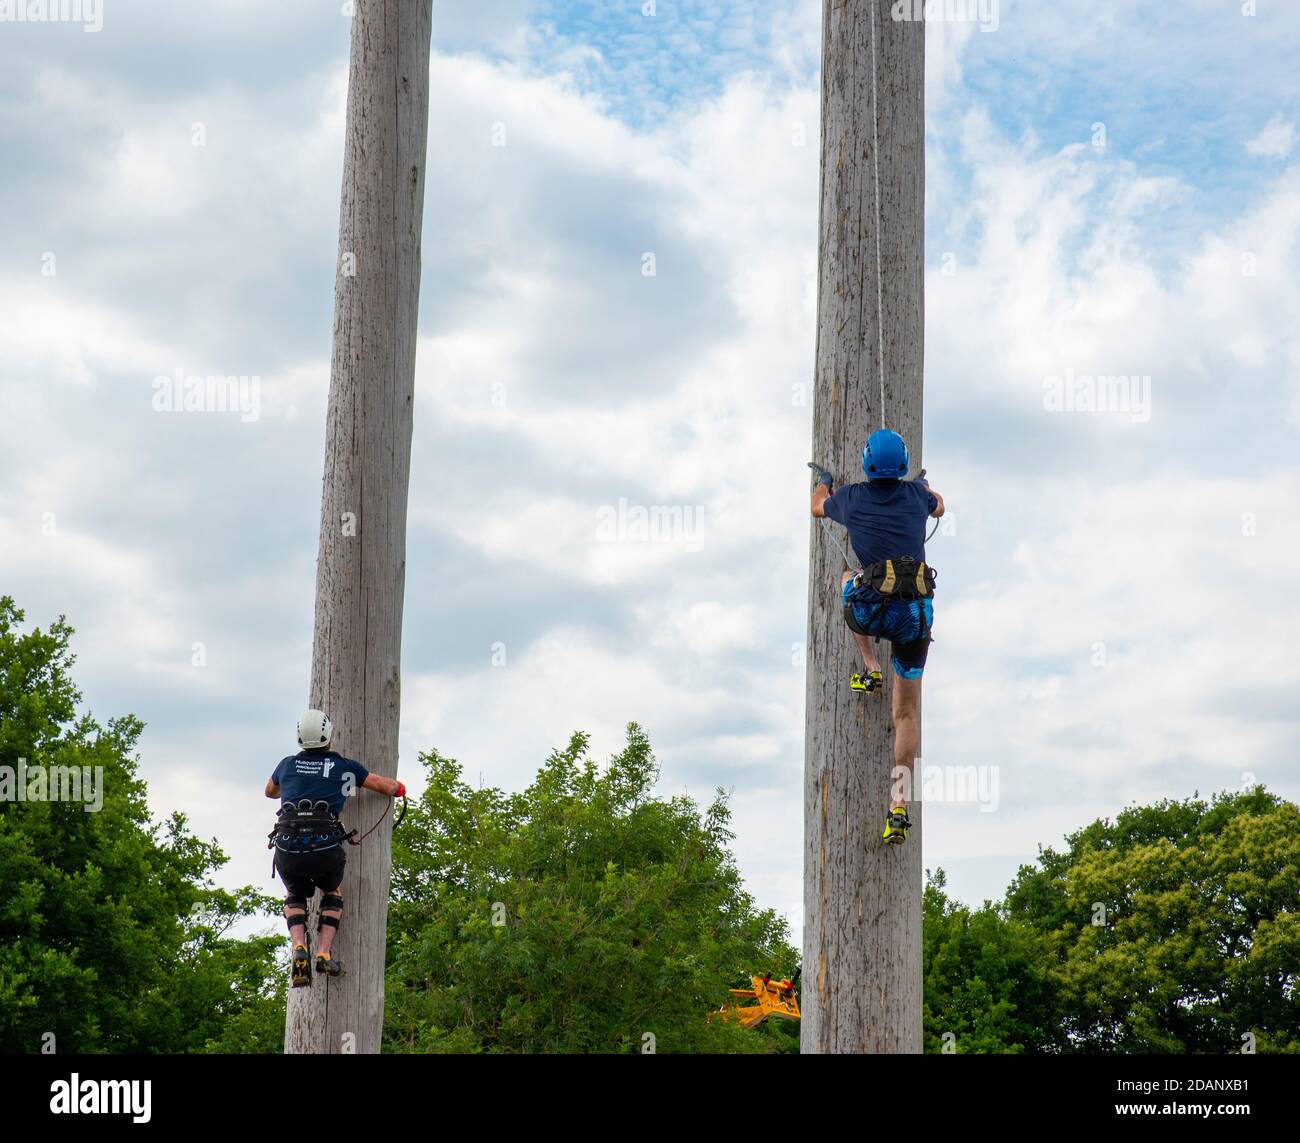 Kent County Show , UK - JULY 07 2017 :Competitors climb a 25m tall pole to see who is the fastest in a pole climbing competition Stock Photo